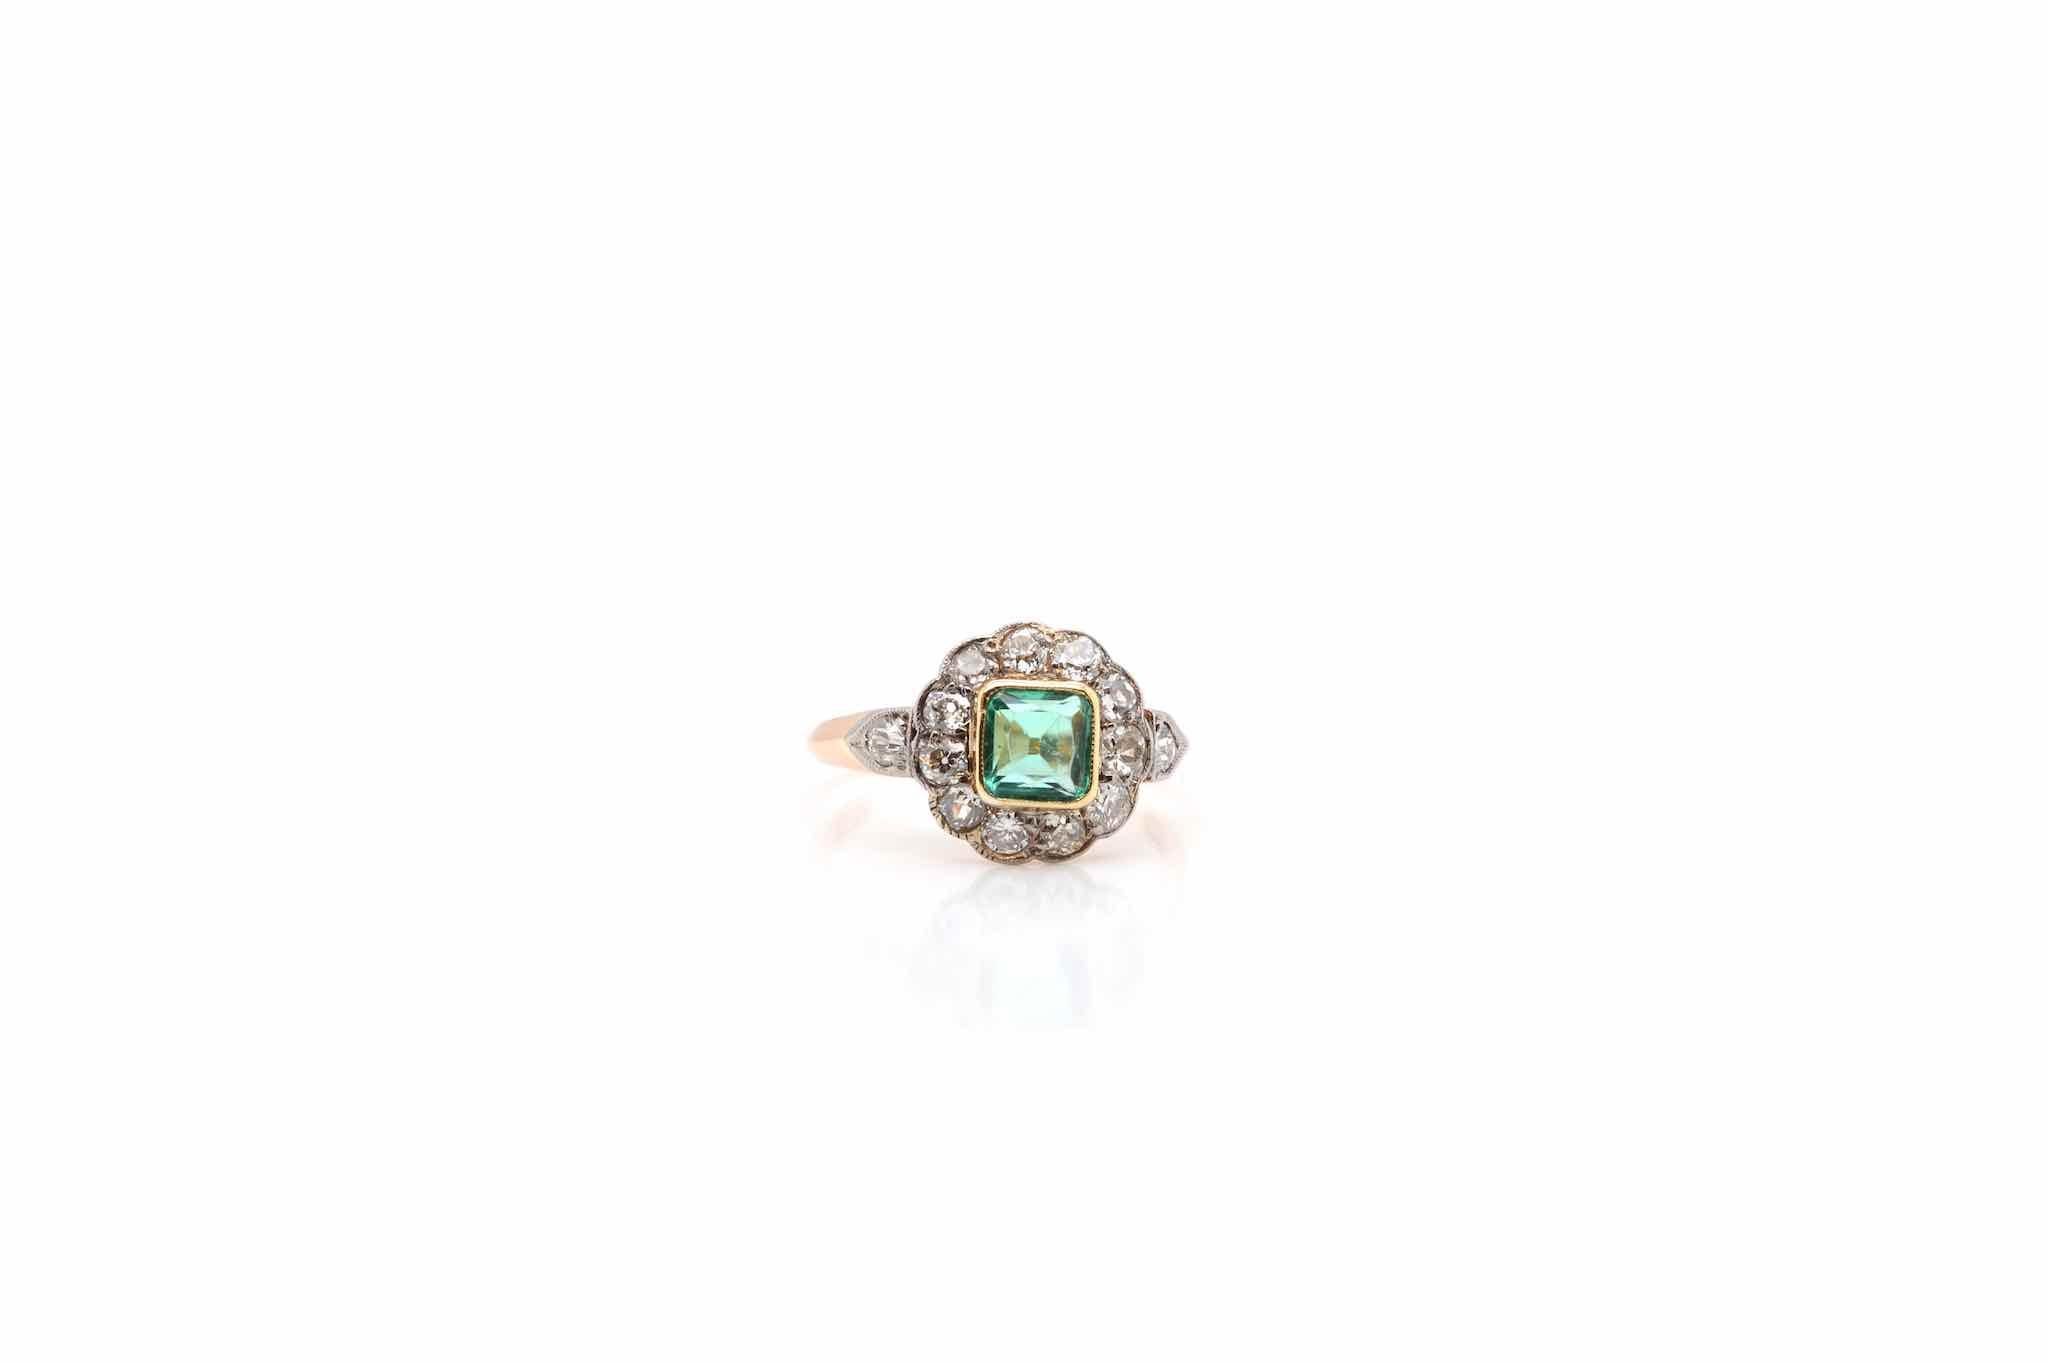 Stones: 0.50 carat Colombian Emerald
and old cut diamonds for a total weight of approximately 1 carat
Material: 18 yellow gold and platinum
Dimensions: 12mm length on finger
Period: 1900
Weight: 2.8g
Size: 54 (free sizing)
Certificate
Ref. : 24925